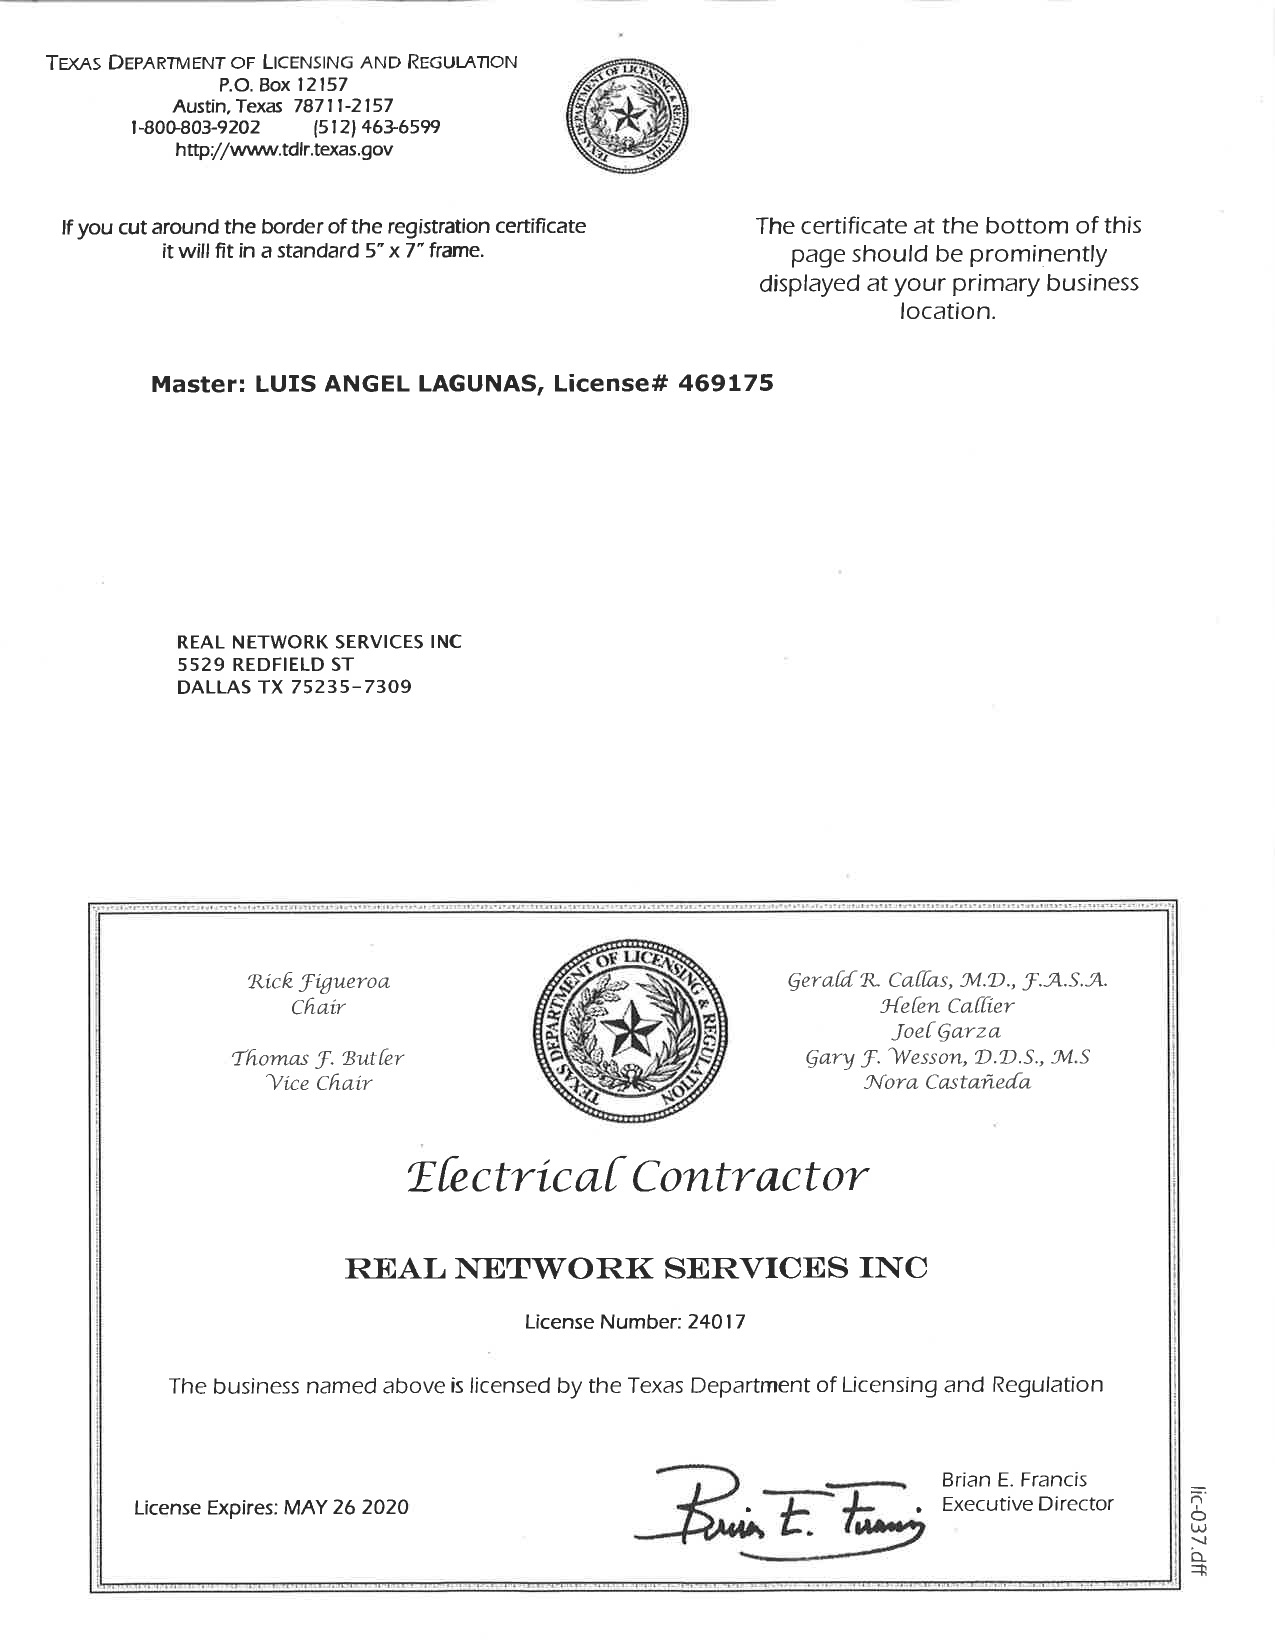 Electrical Contractor License Off 62 Online Shopping Site For Fashion Lifestyle